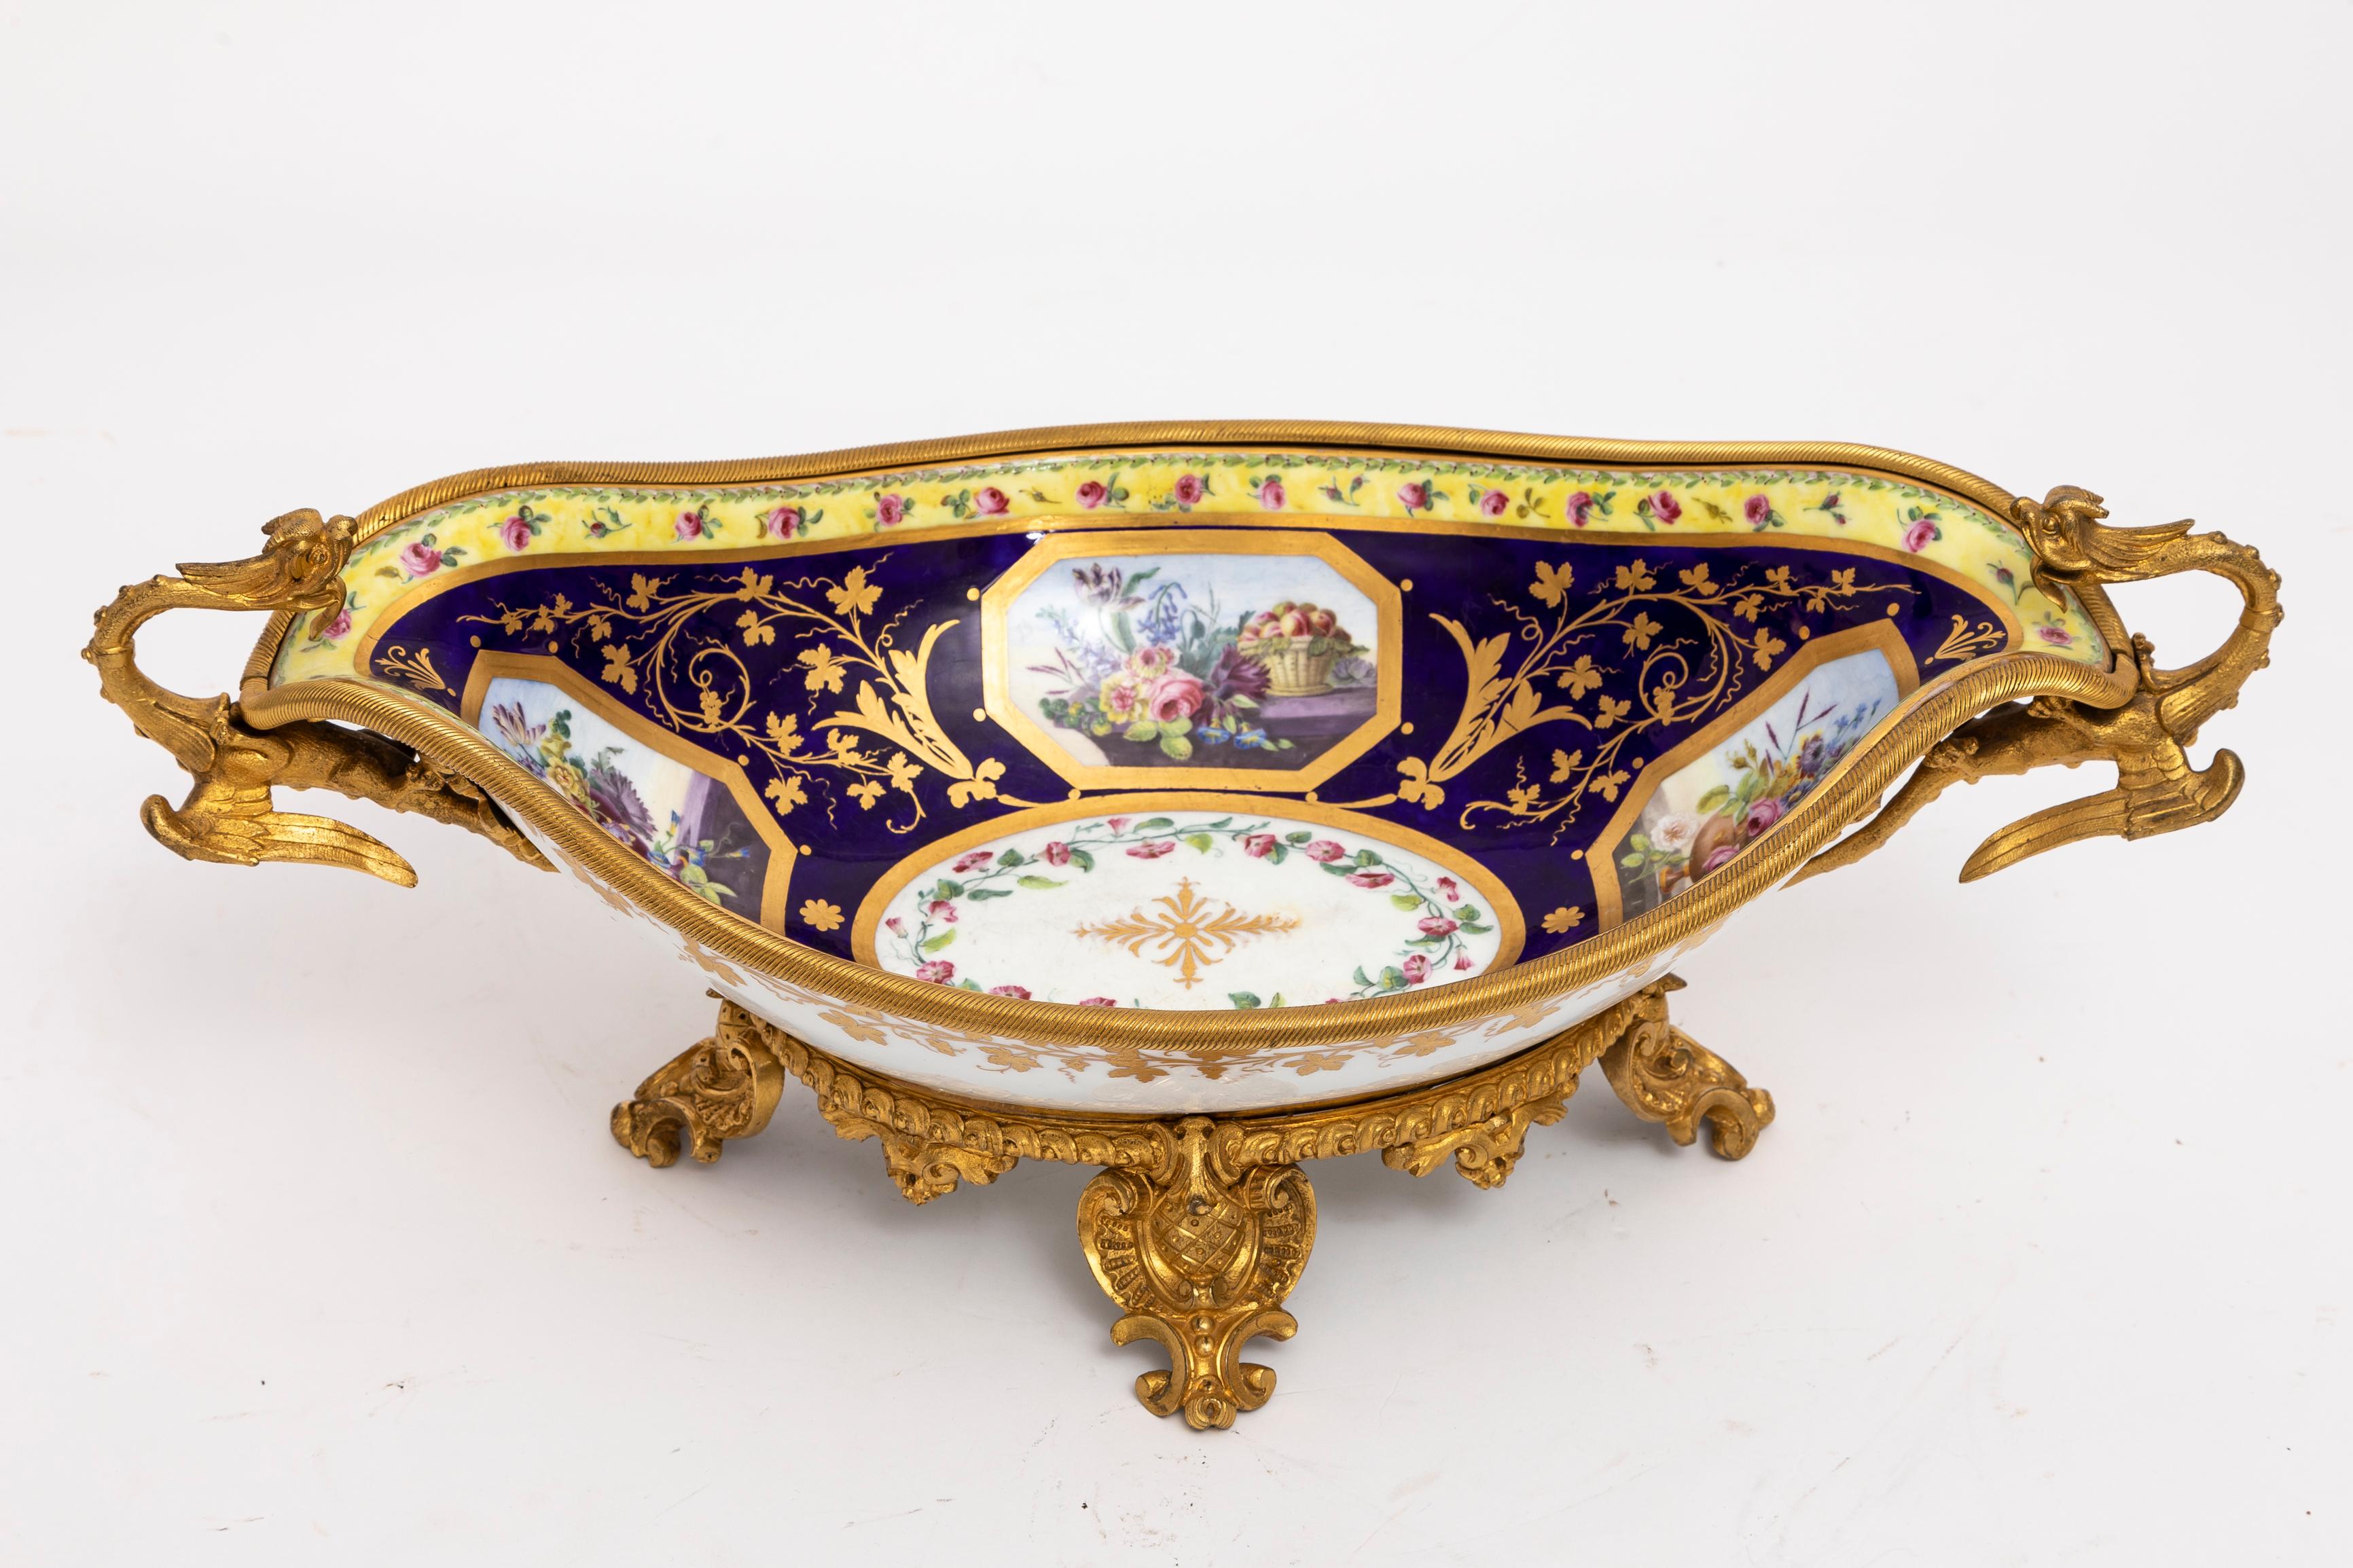 This exquisite 18th Century French Ormolu Mounted Sevres Porcelain Centerpiece painted and decorated by Jean-Jacques Pierre, adorned with enchanting early 1800's ormolu dragon handles and the finest quality ormolu mounts, is a veritable testament to